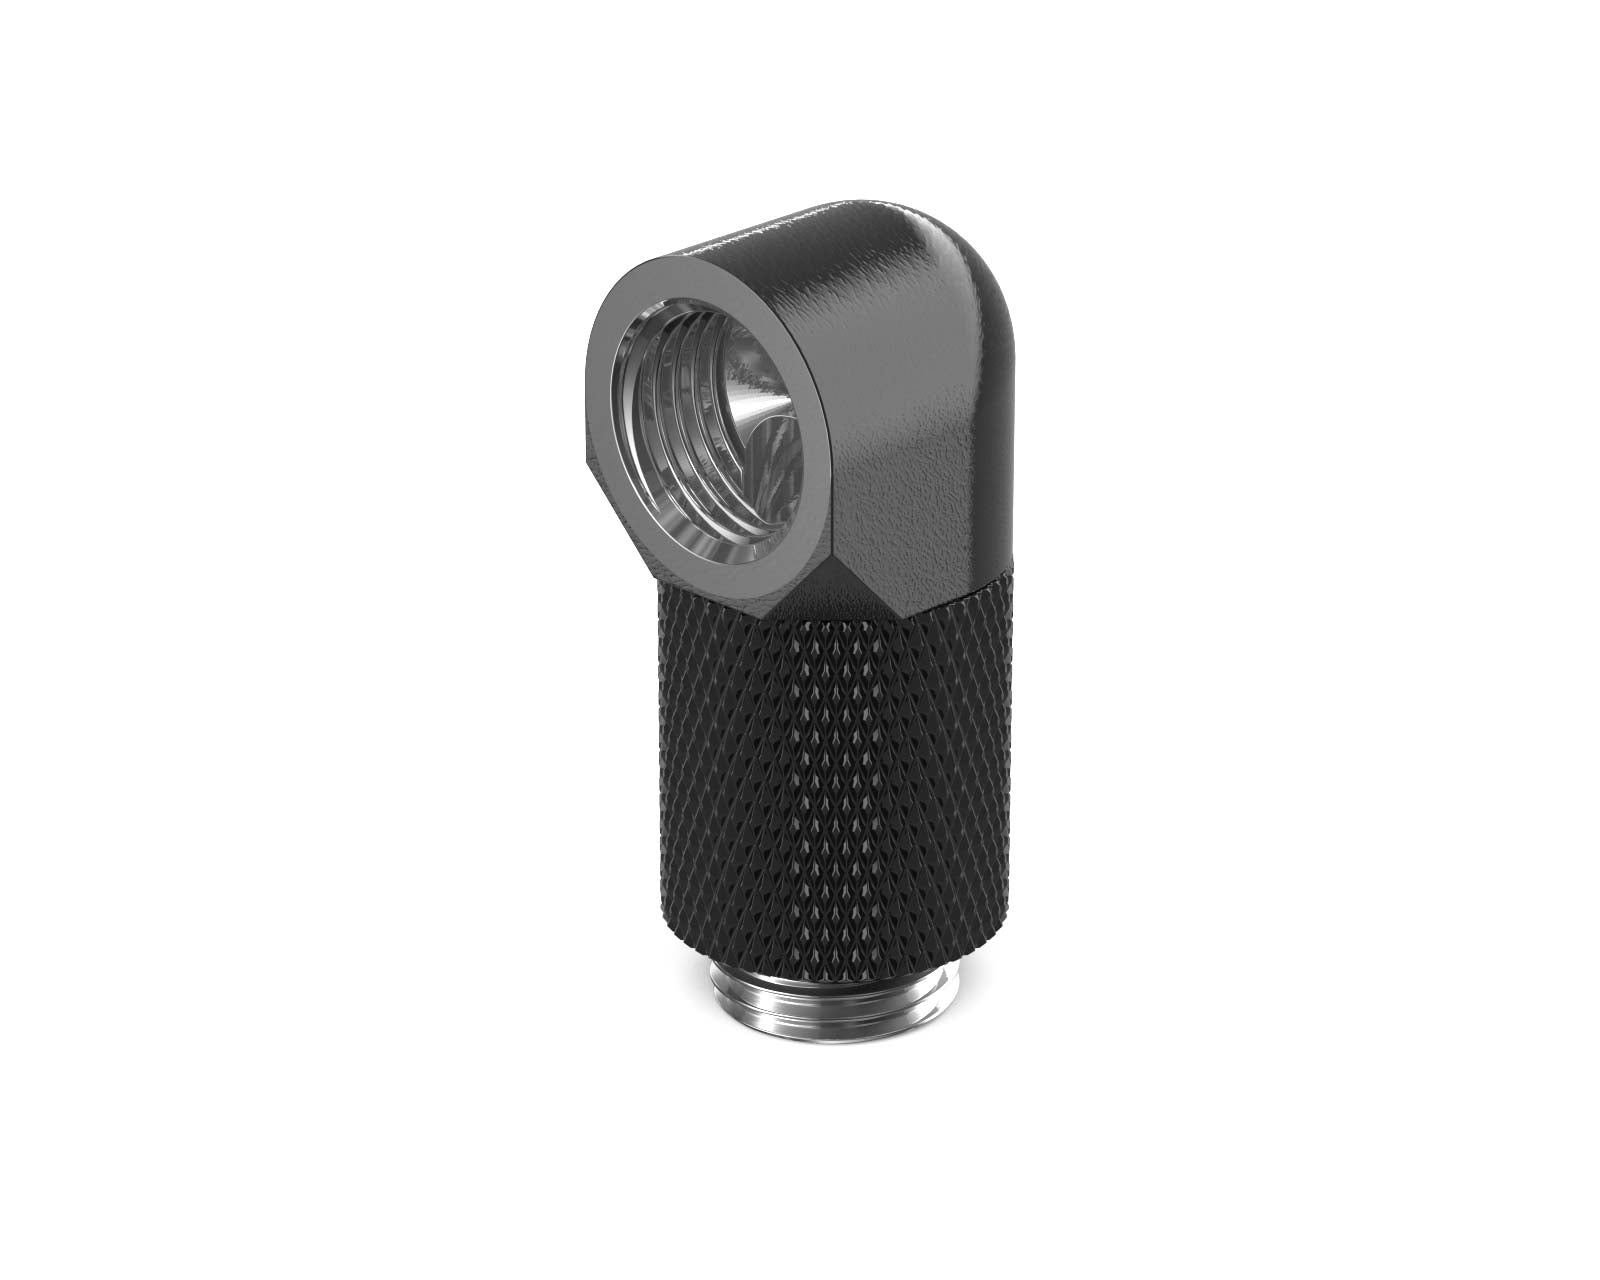 PrimoChill Male to Female G 1/4in. 90 Degree SX Rotary 20mm Extension Elbow Fitting - PrimoChill - KEEPING IT COOL Satin Black